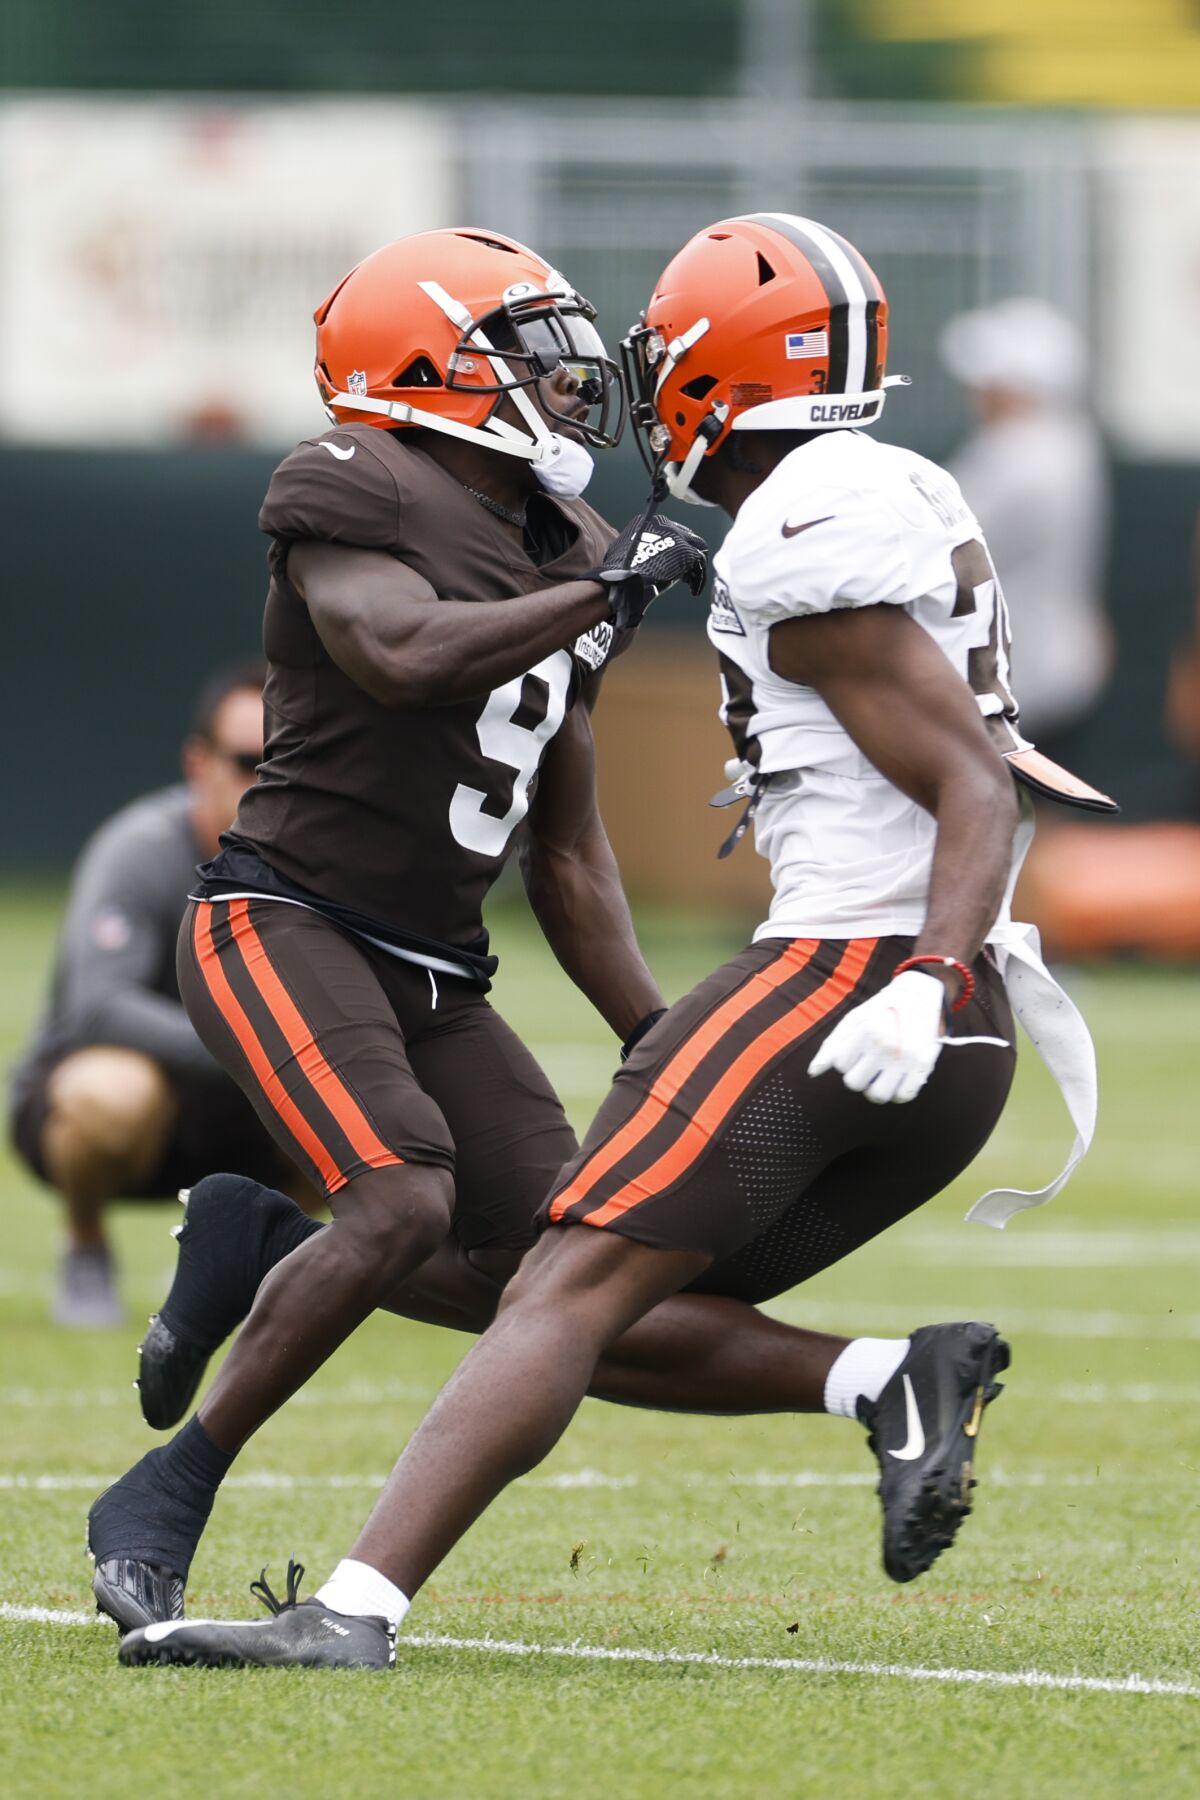 Cleveland Browns wide receiver Jakeem Grant Sr. (9) goes up for a pass against cornerback A.J. Green and is injured on the play during the NFL football team's training camp, Tuesday, Aug. 9, 2022, in Berea, Ohio. (AP Photo/Ron Schwane)